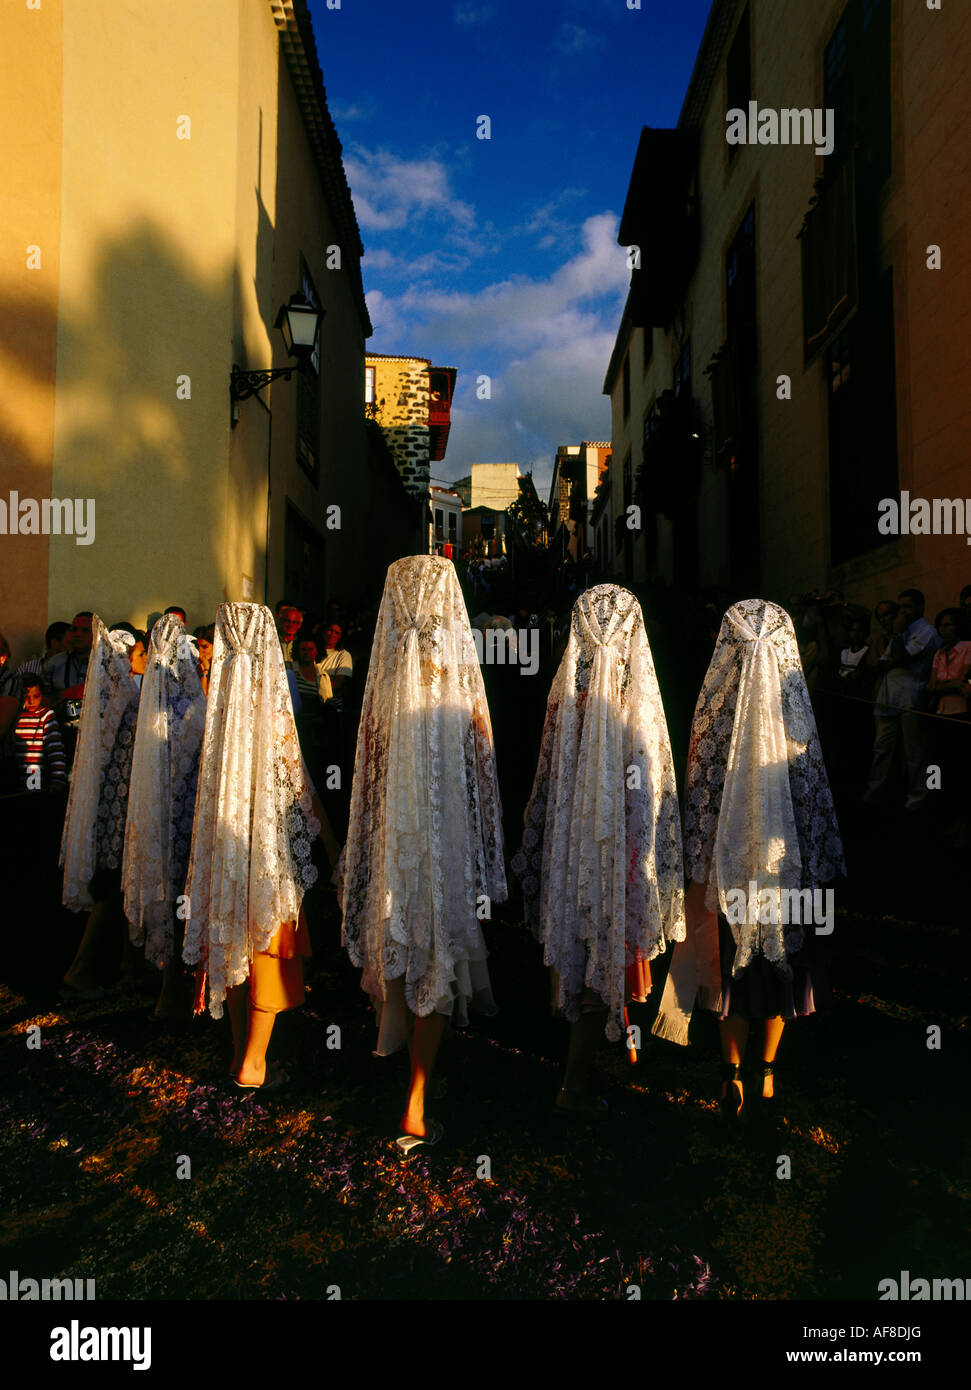 Ladies with mantillas, lace scarfs, traditional headcovering, procession on floral carpets, old town of La Orotava, Tenerife, Ca Stock Photo